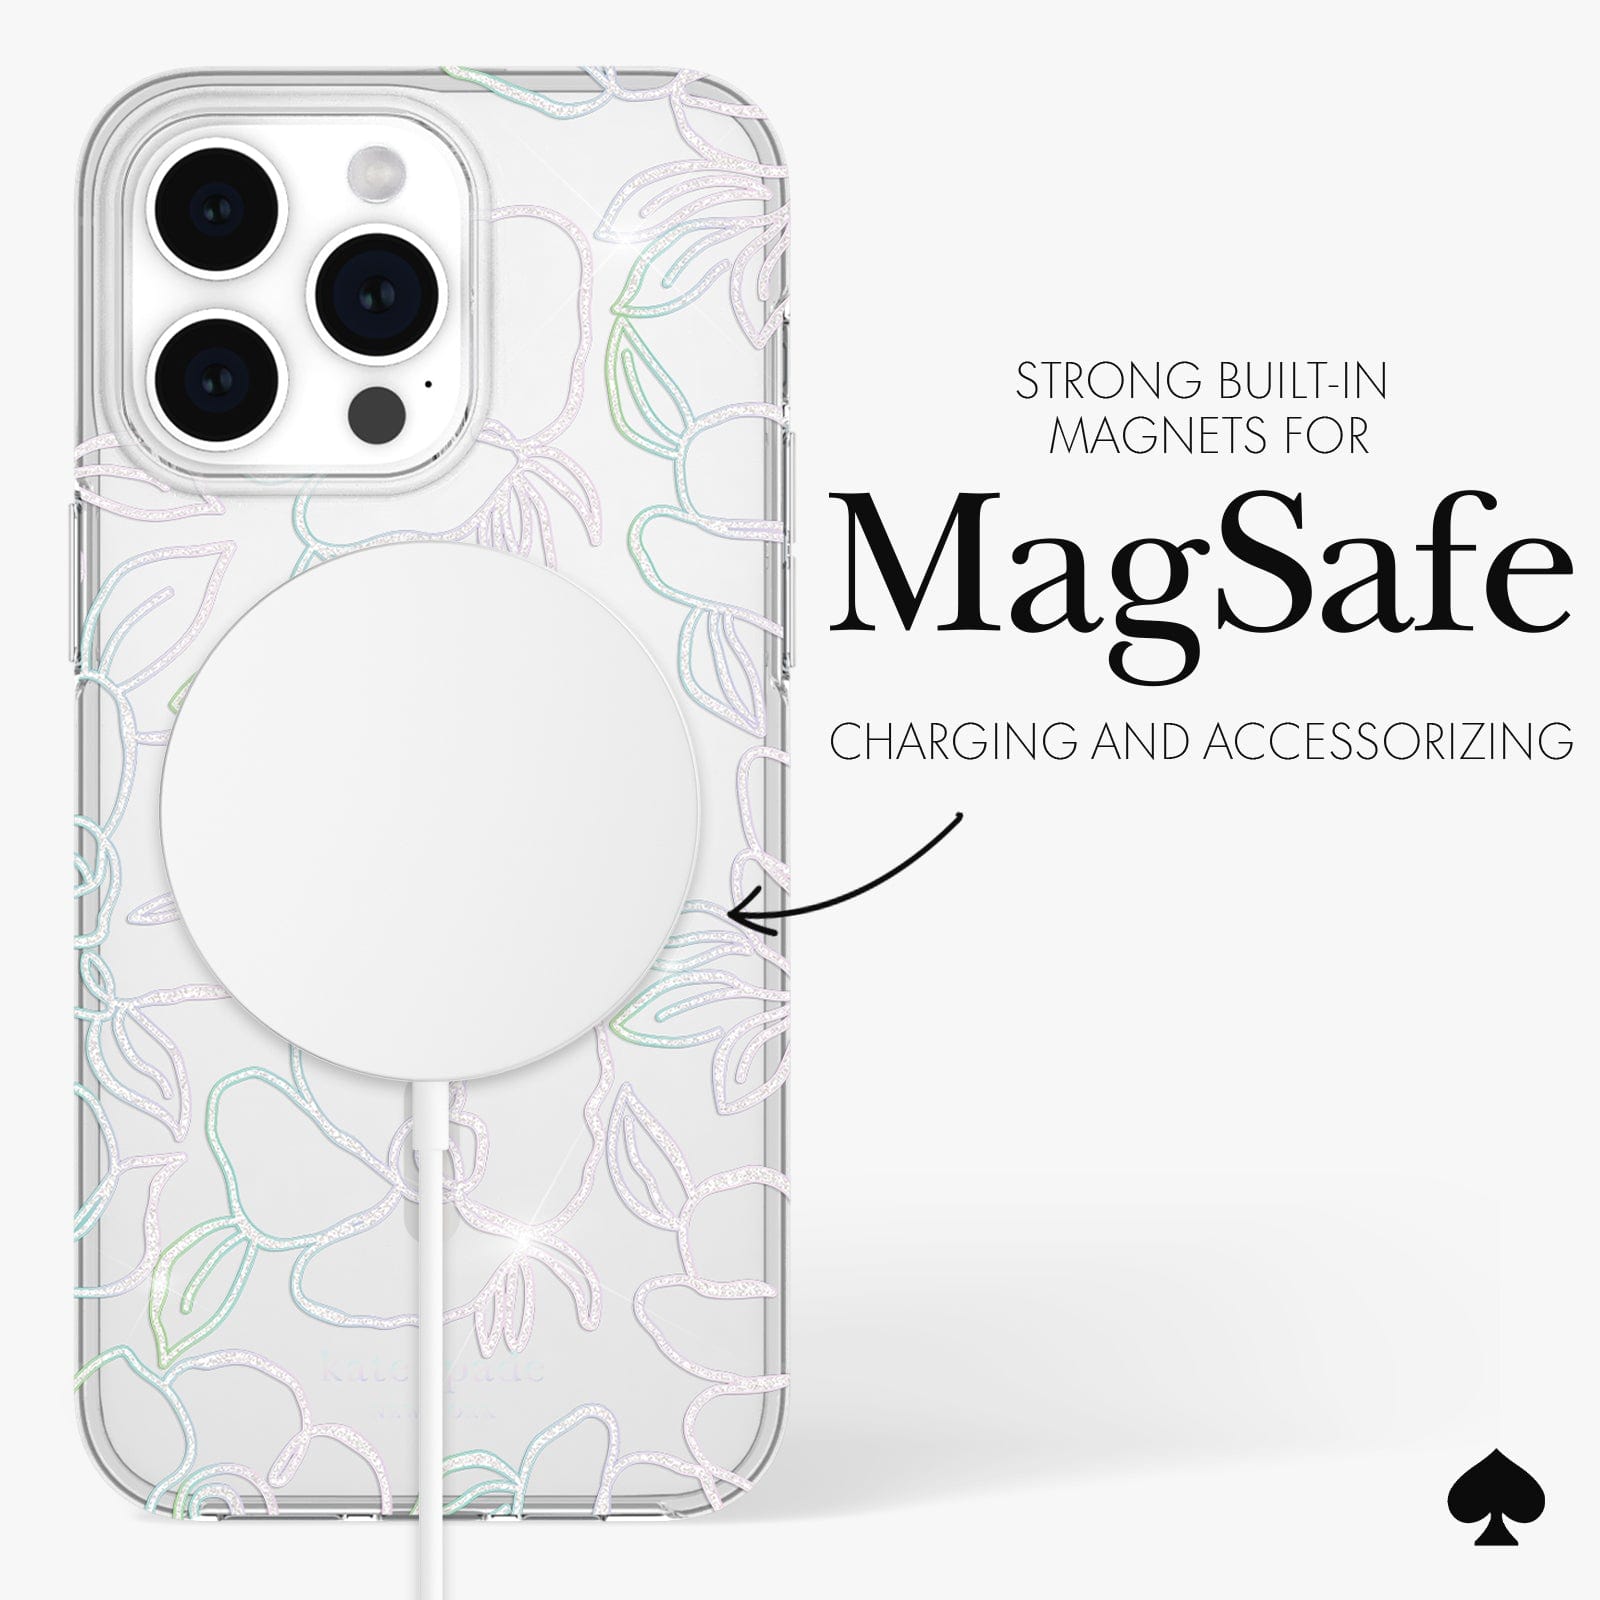 STRONG BUILT IN MAGNETS FOR MAGSAFE CHARGING AND ACCESSORIZING